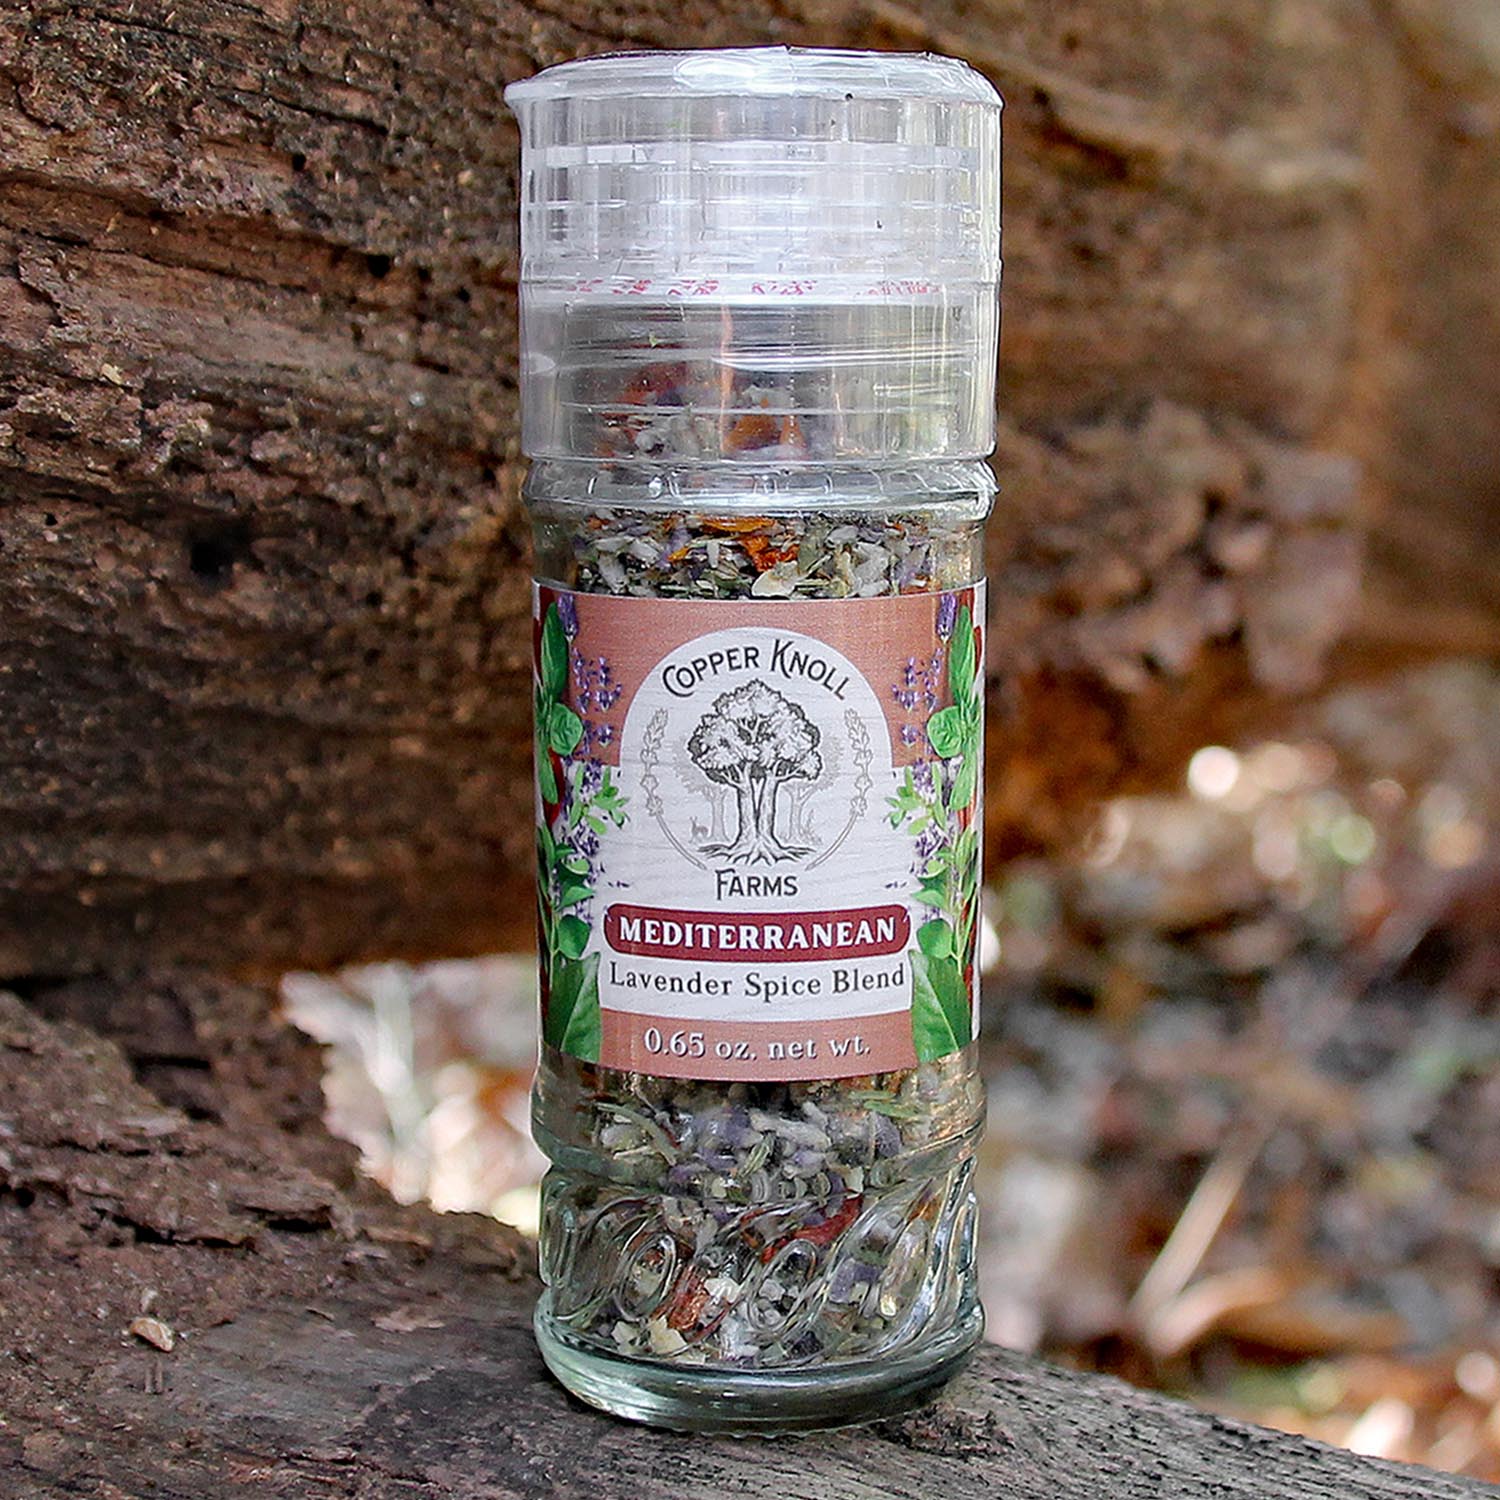 Introducing Our New Mediterranean Lavender Spice Blend